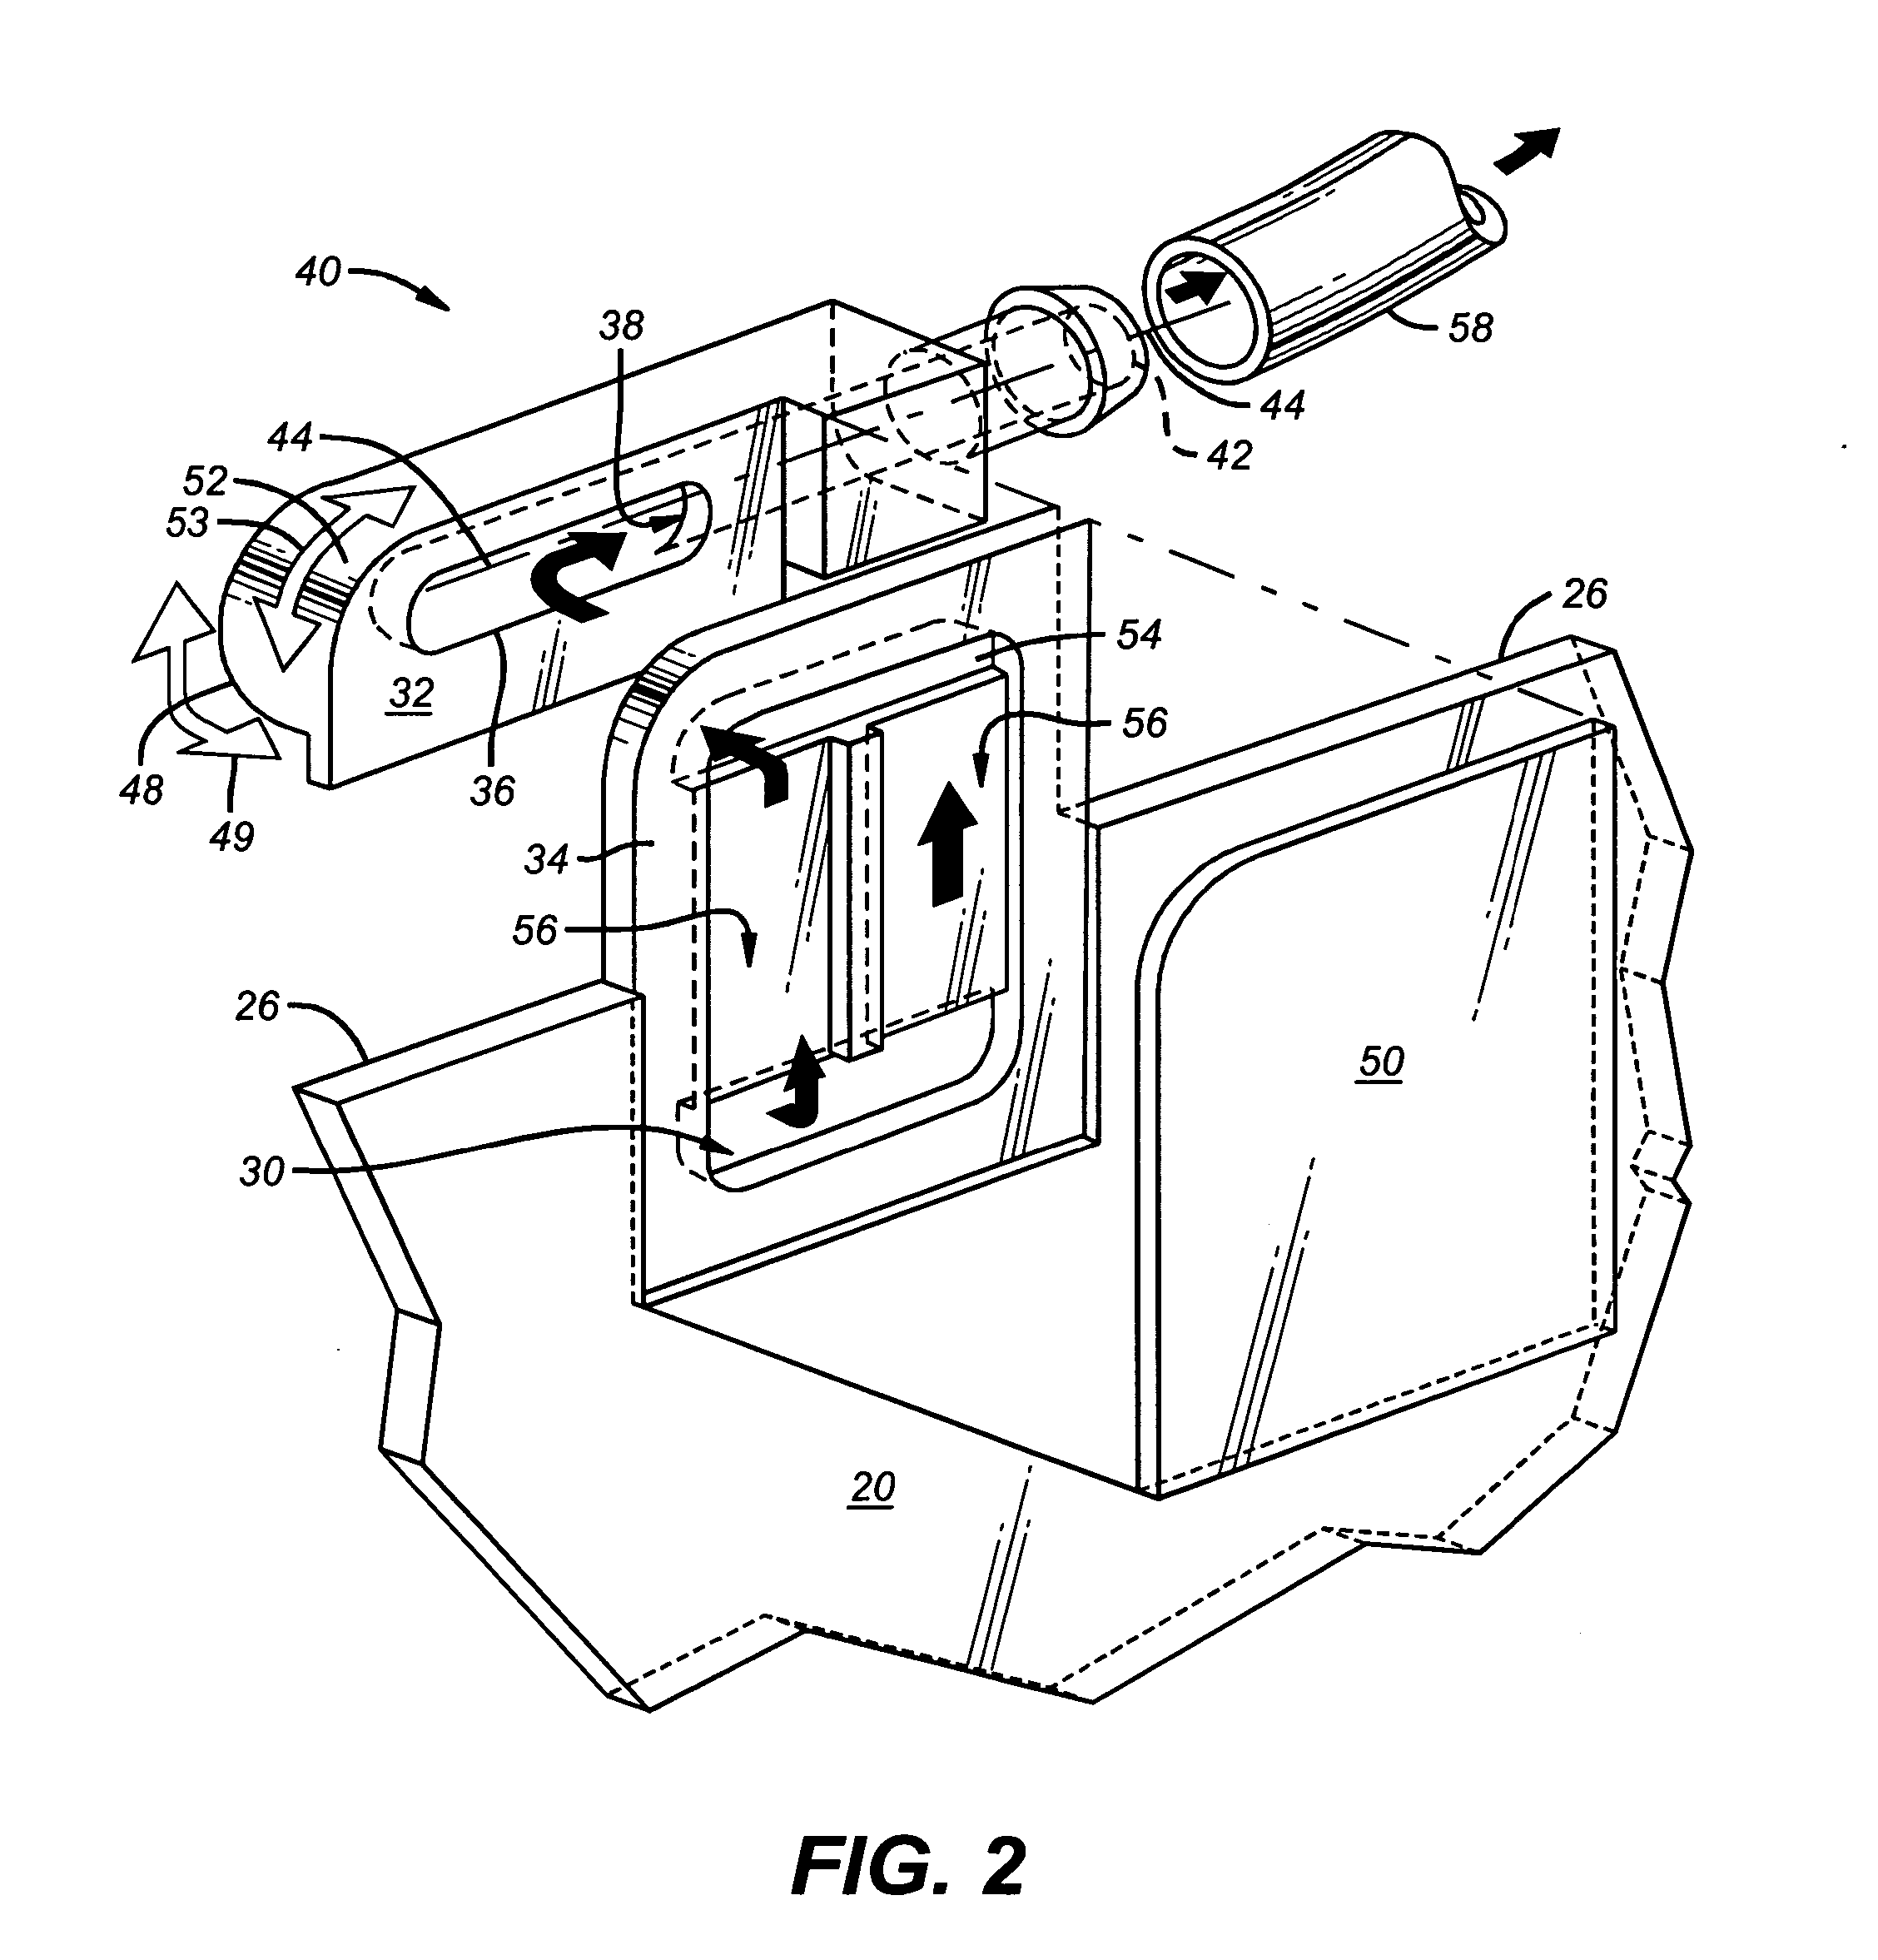 Durable fill block for flow of fluids through a hinged lid